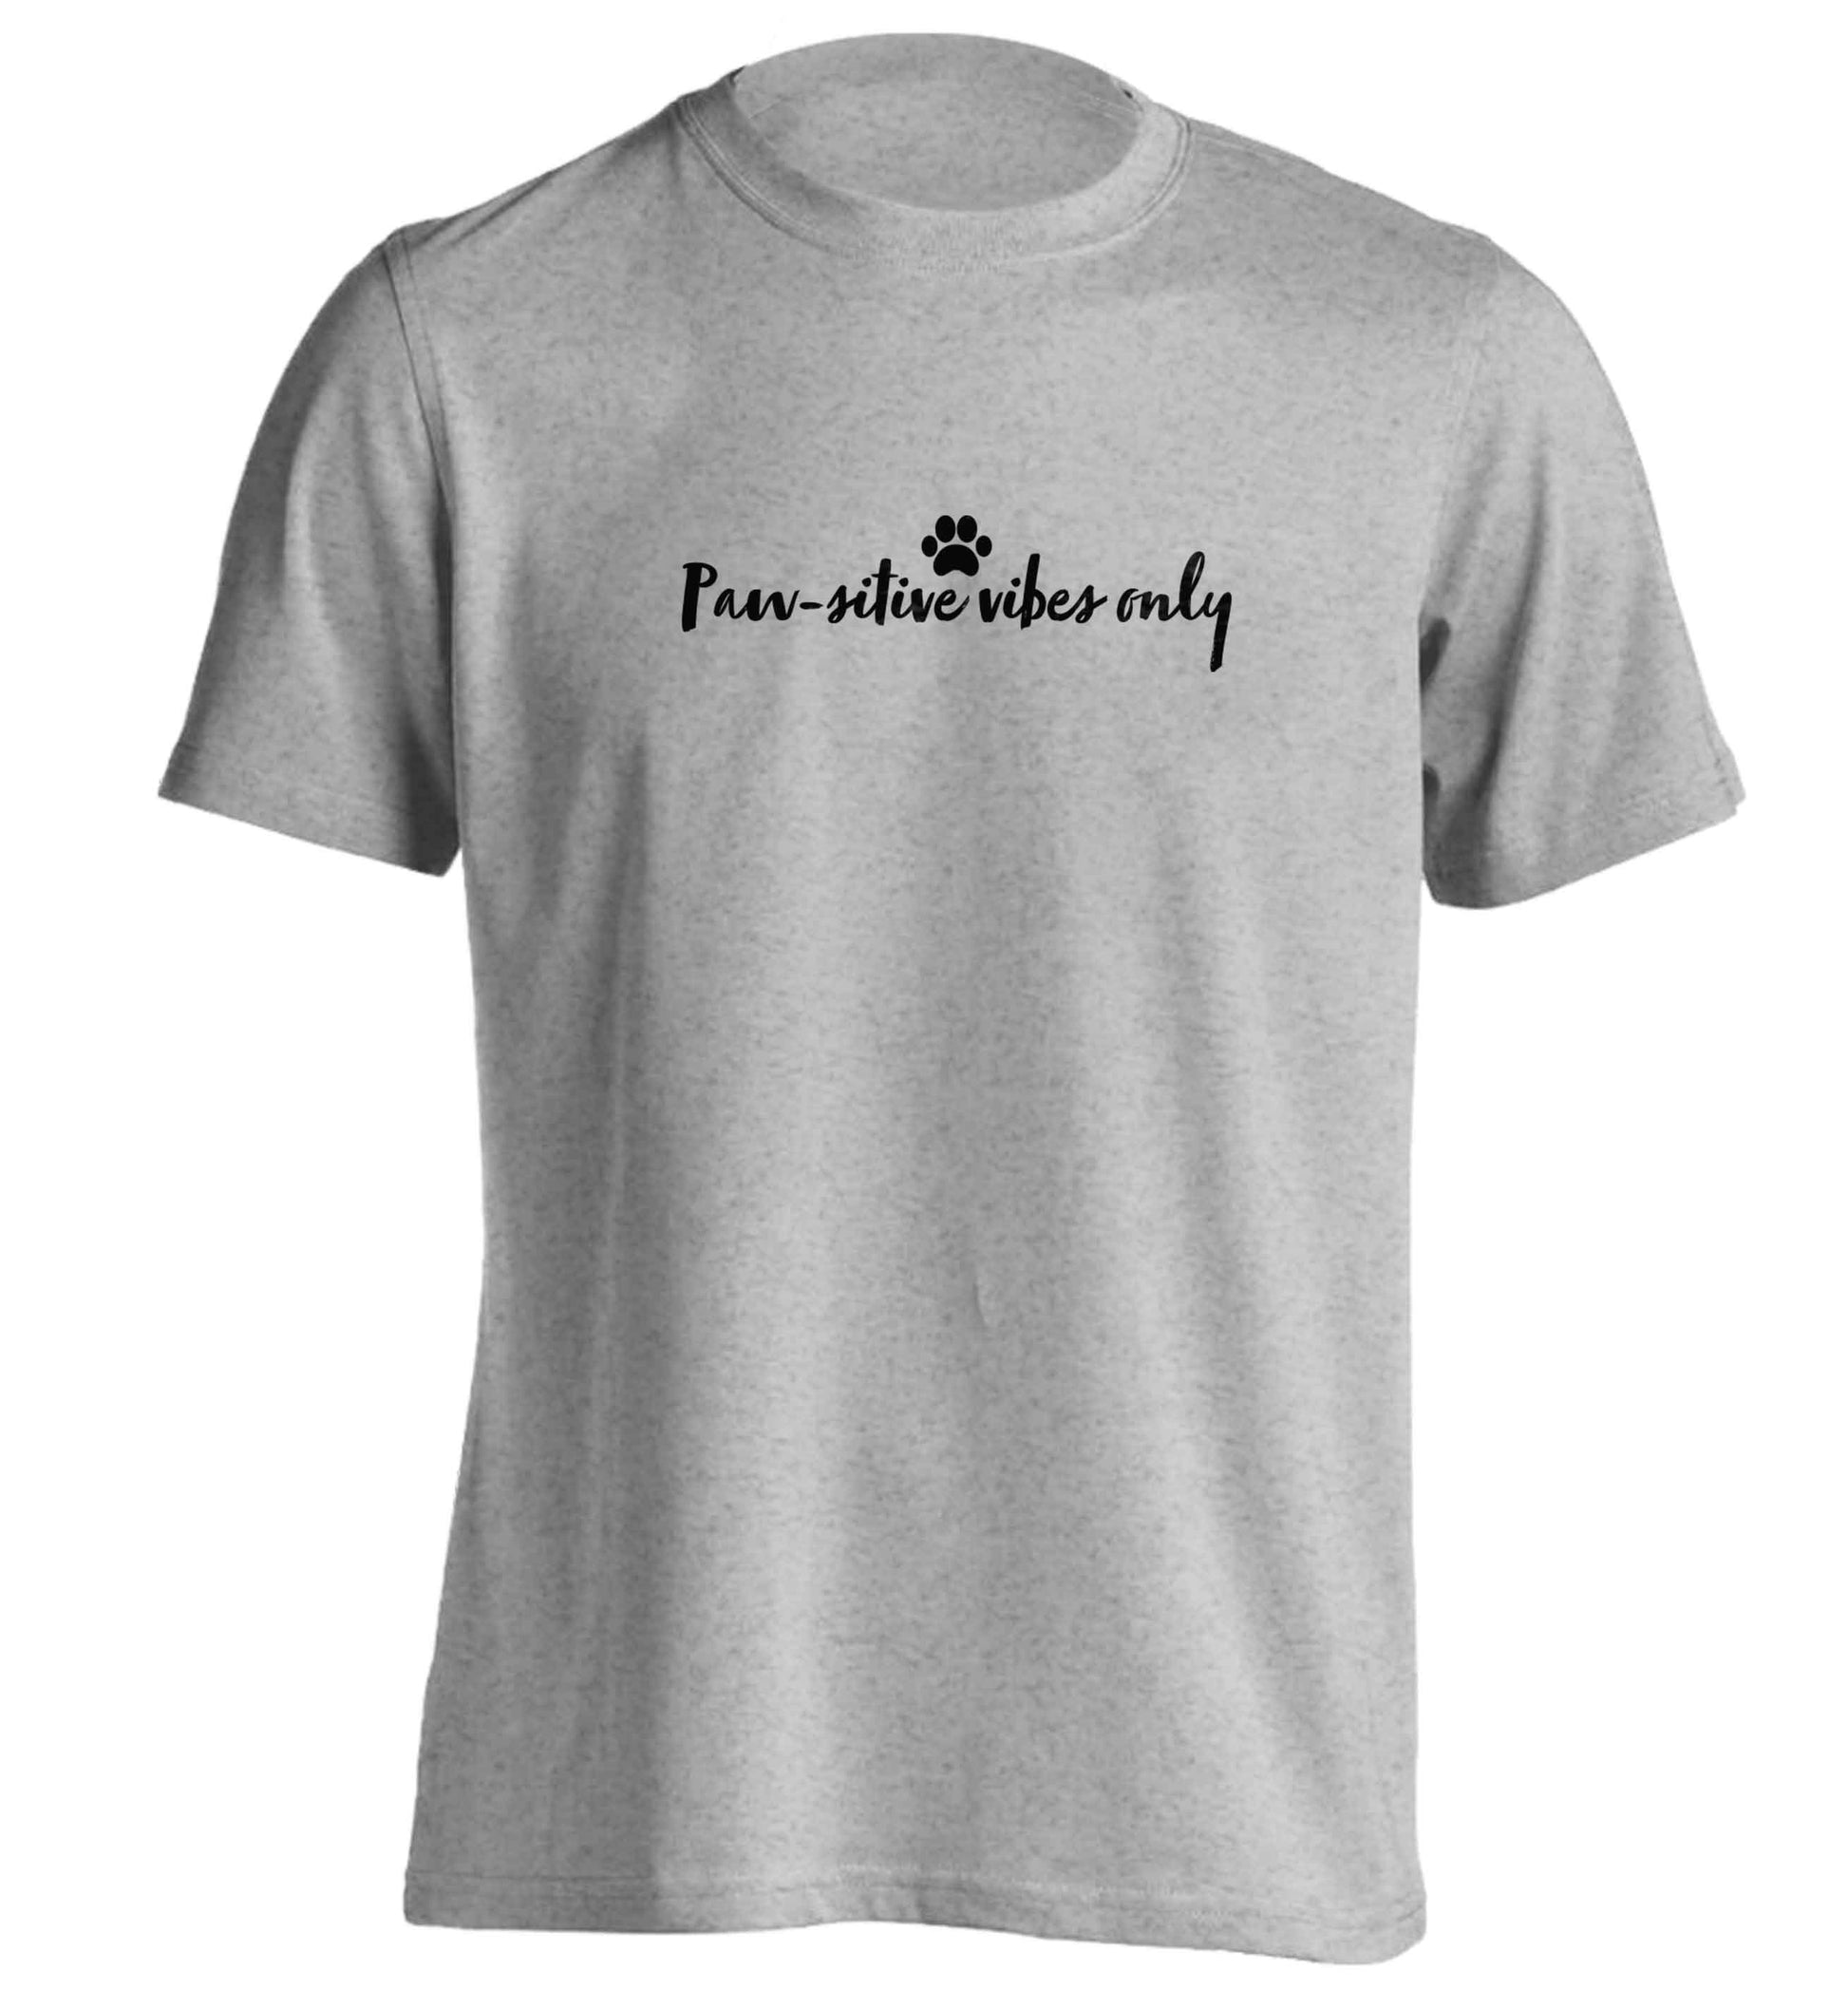 Pawsitive vibes only Kit adults unisex grey Tshirt 2XL